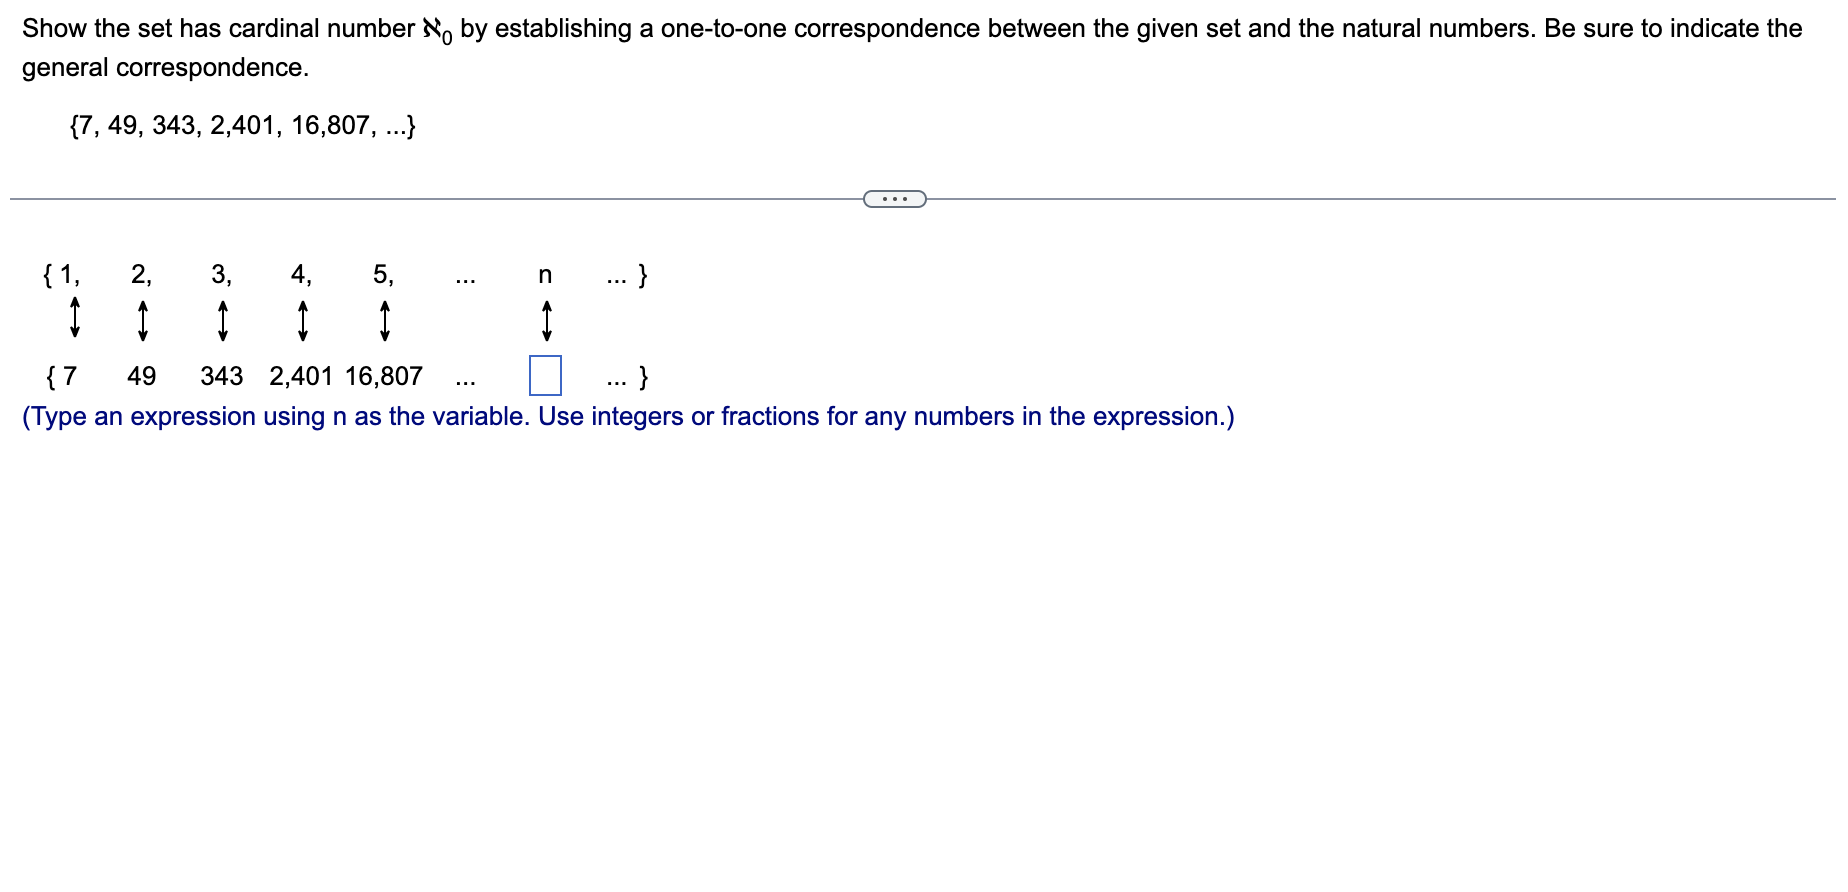 Information about the correspondence between the number and type of